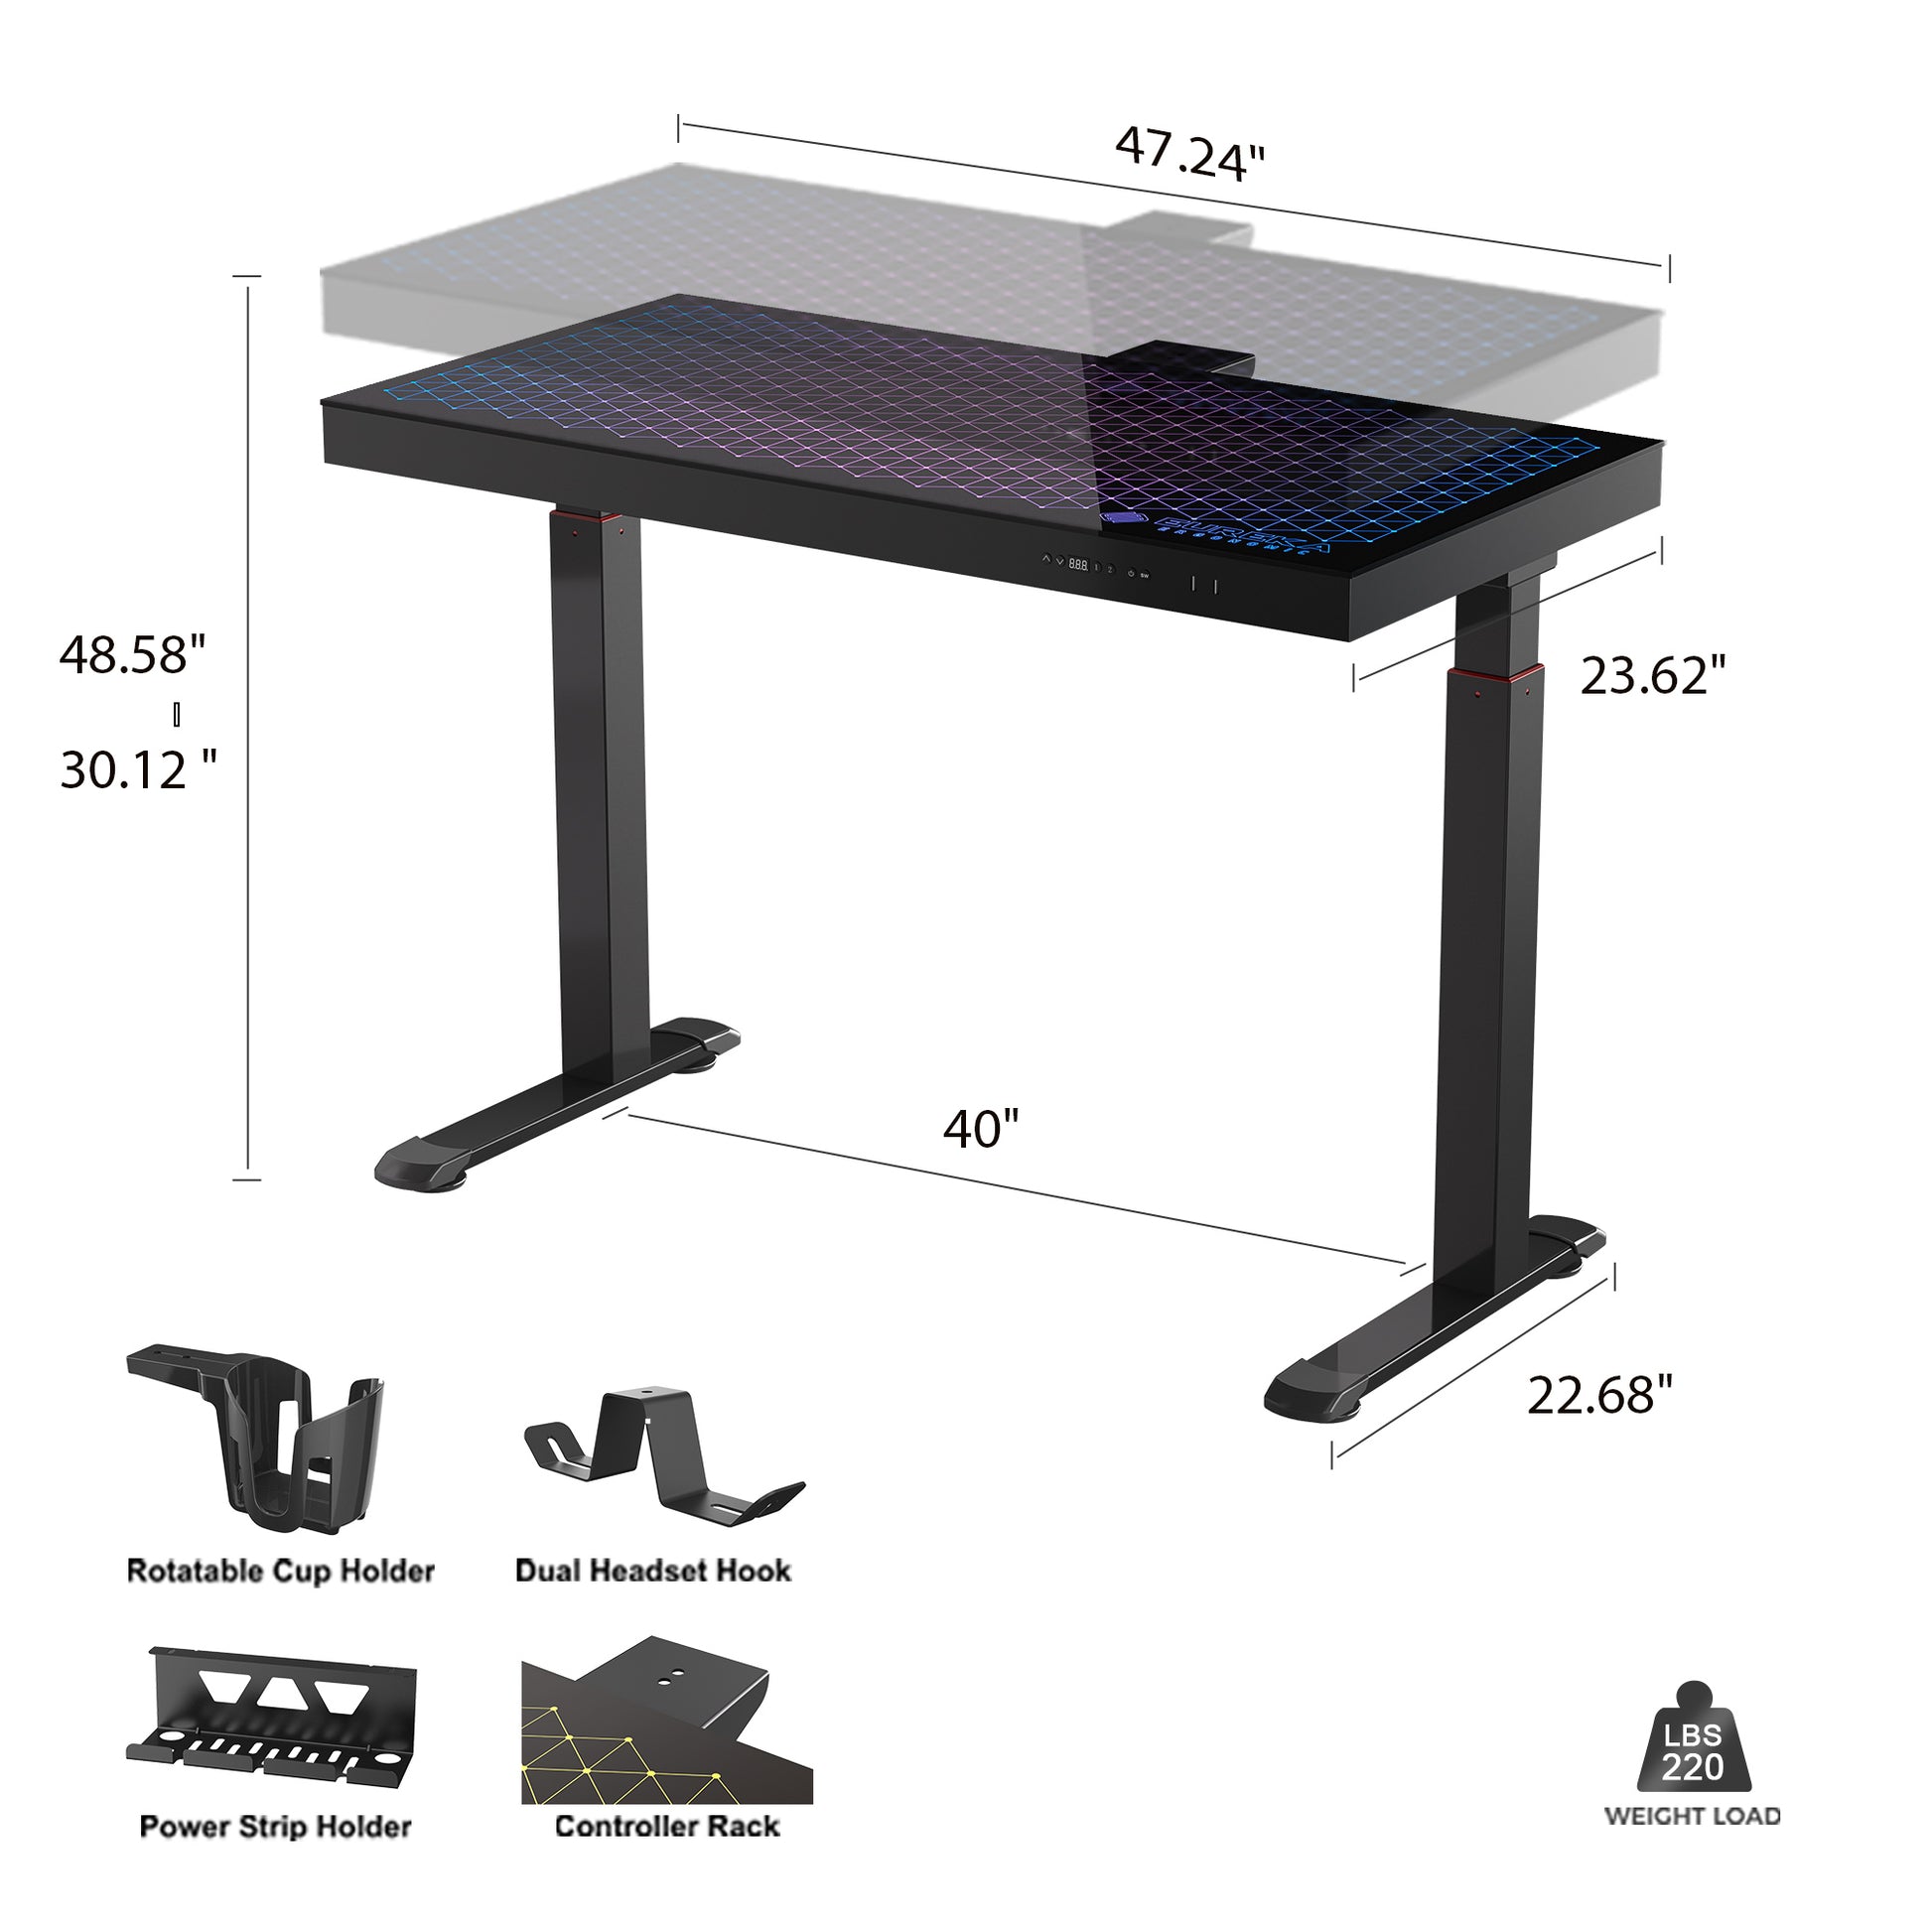 GTG 47 inch height adjustable RGB glass desk, gaming desk, RGB lighting, versatile design great for gaming room, work from home, content creation, sturdy standing desk, Accessory set,  Product Dimensions